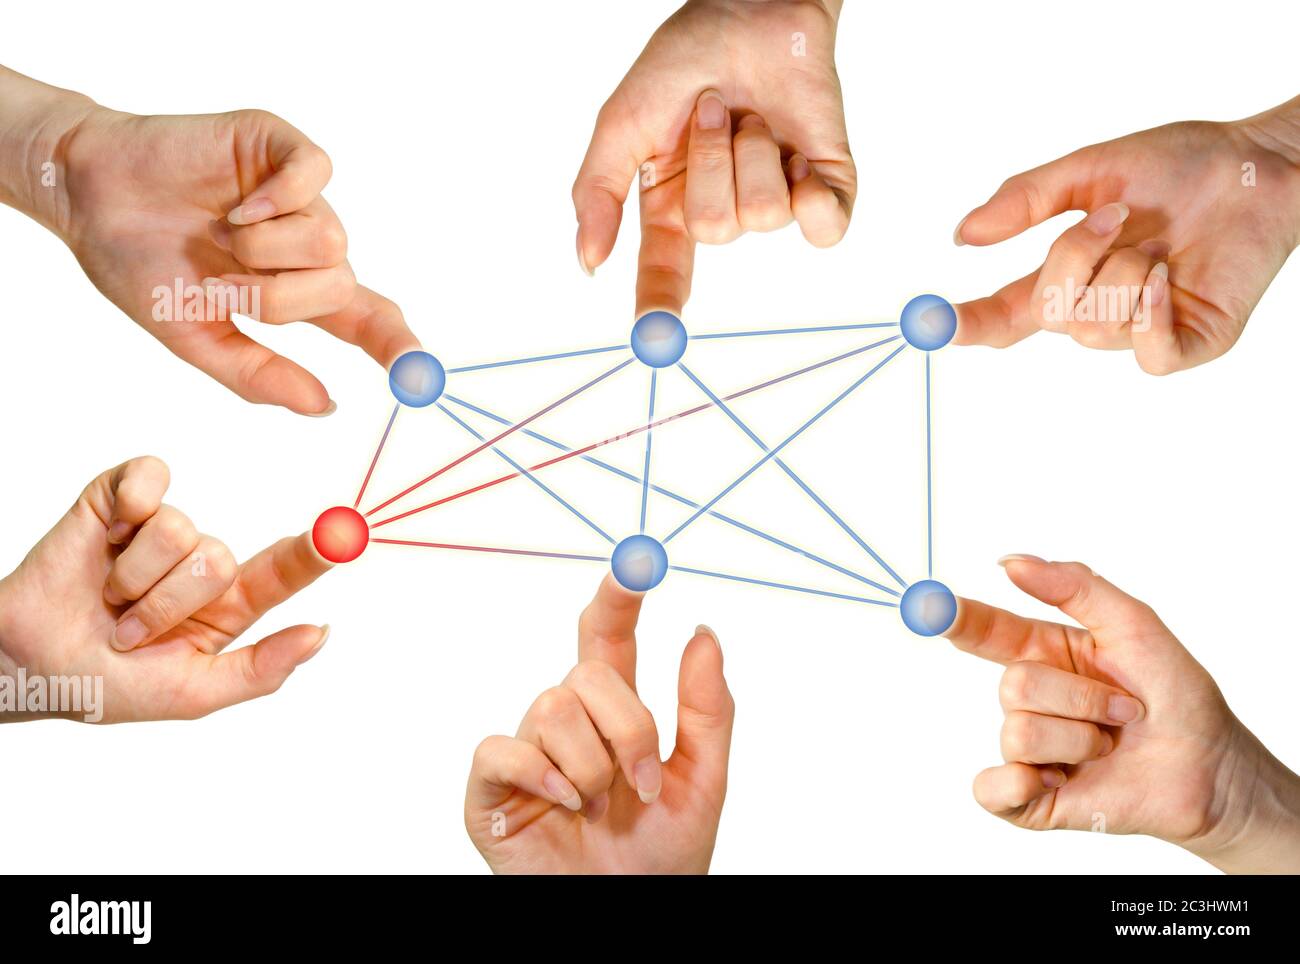 Many hands connected through virtual network with information or virus spreading Stock Photo